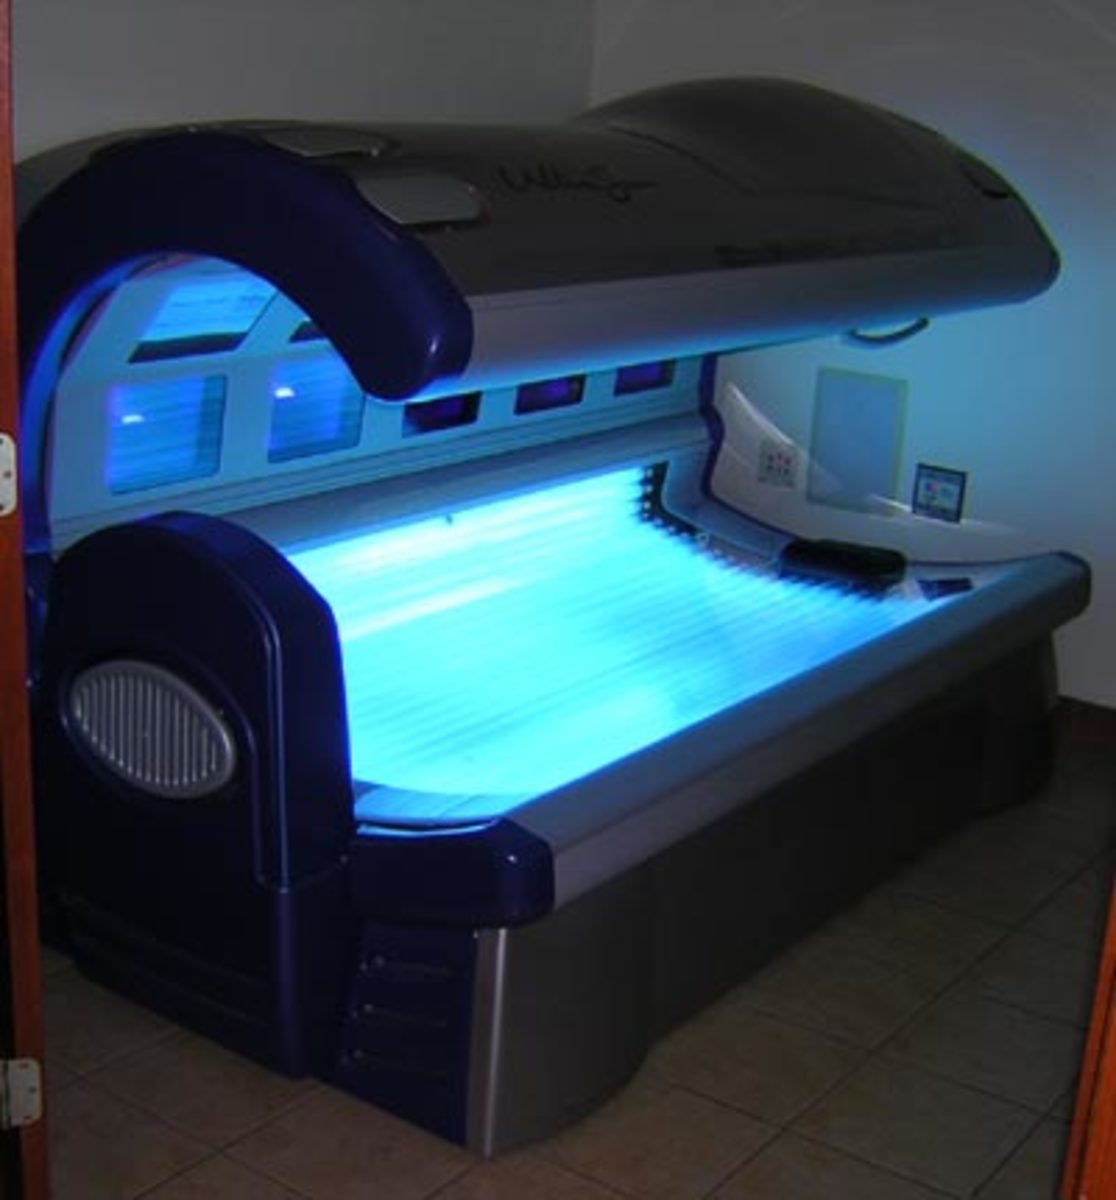 A Guide To Indoor Tanning Beds Hubpages, Do Tanning Beds Have A Weight Limit